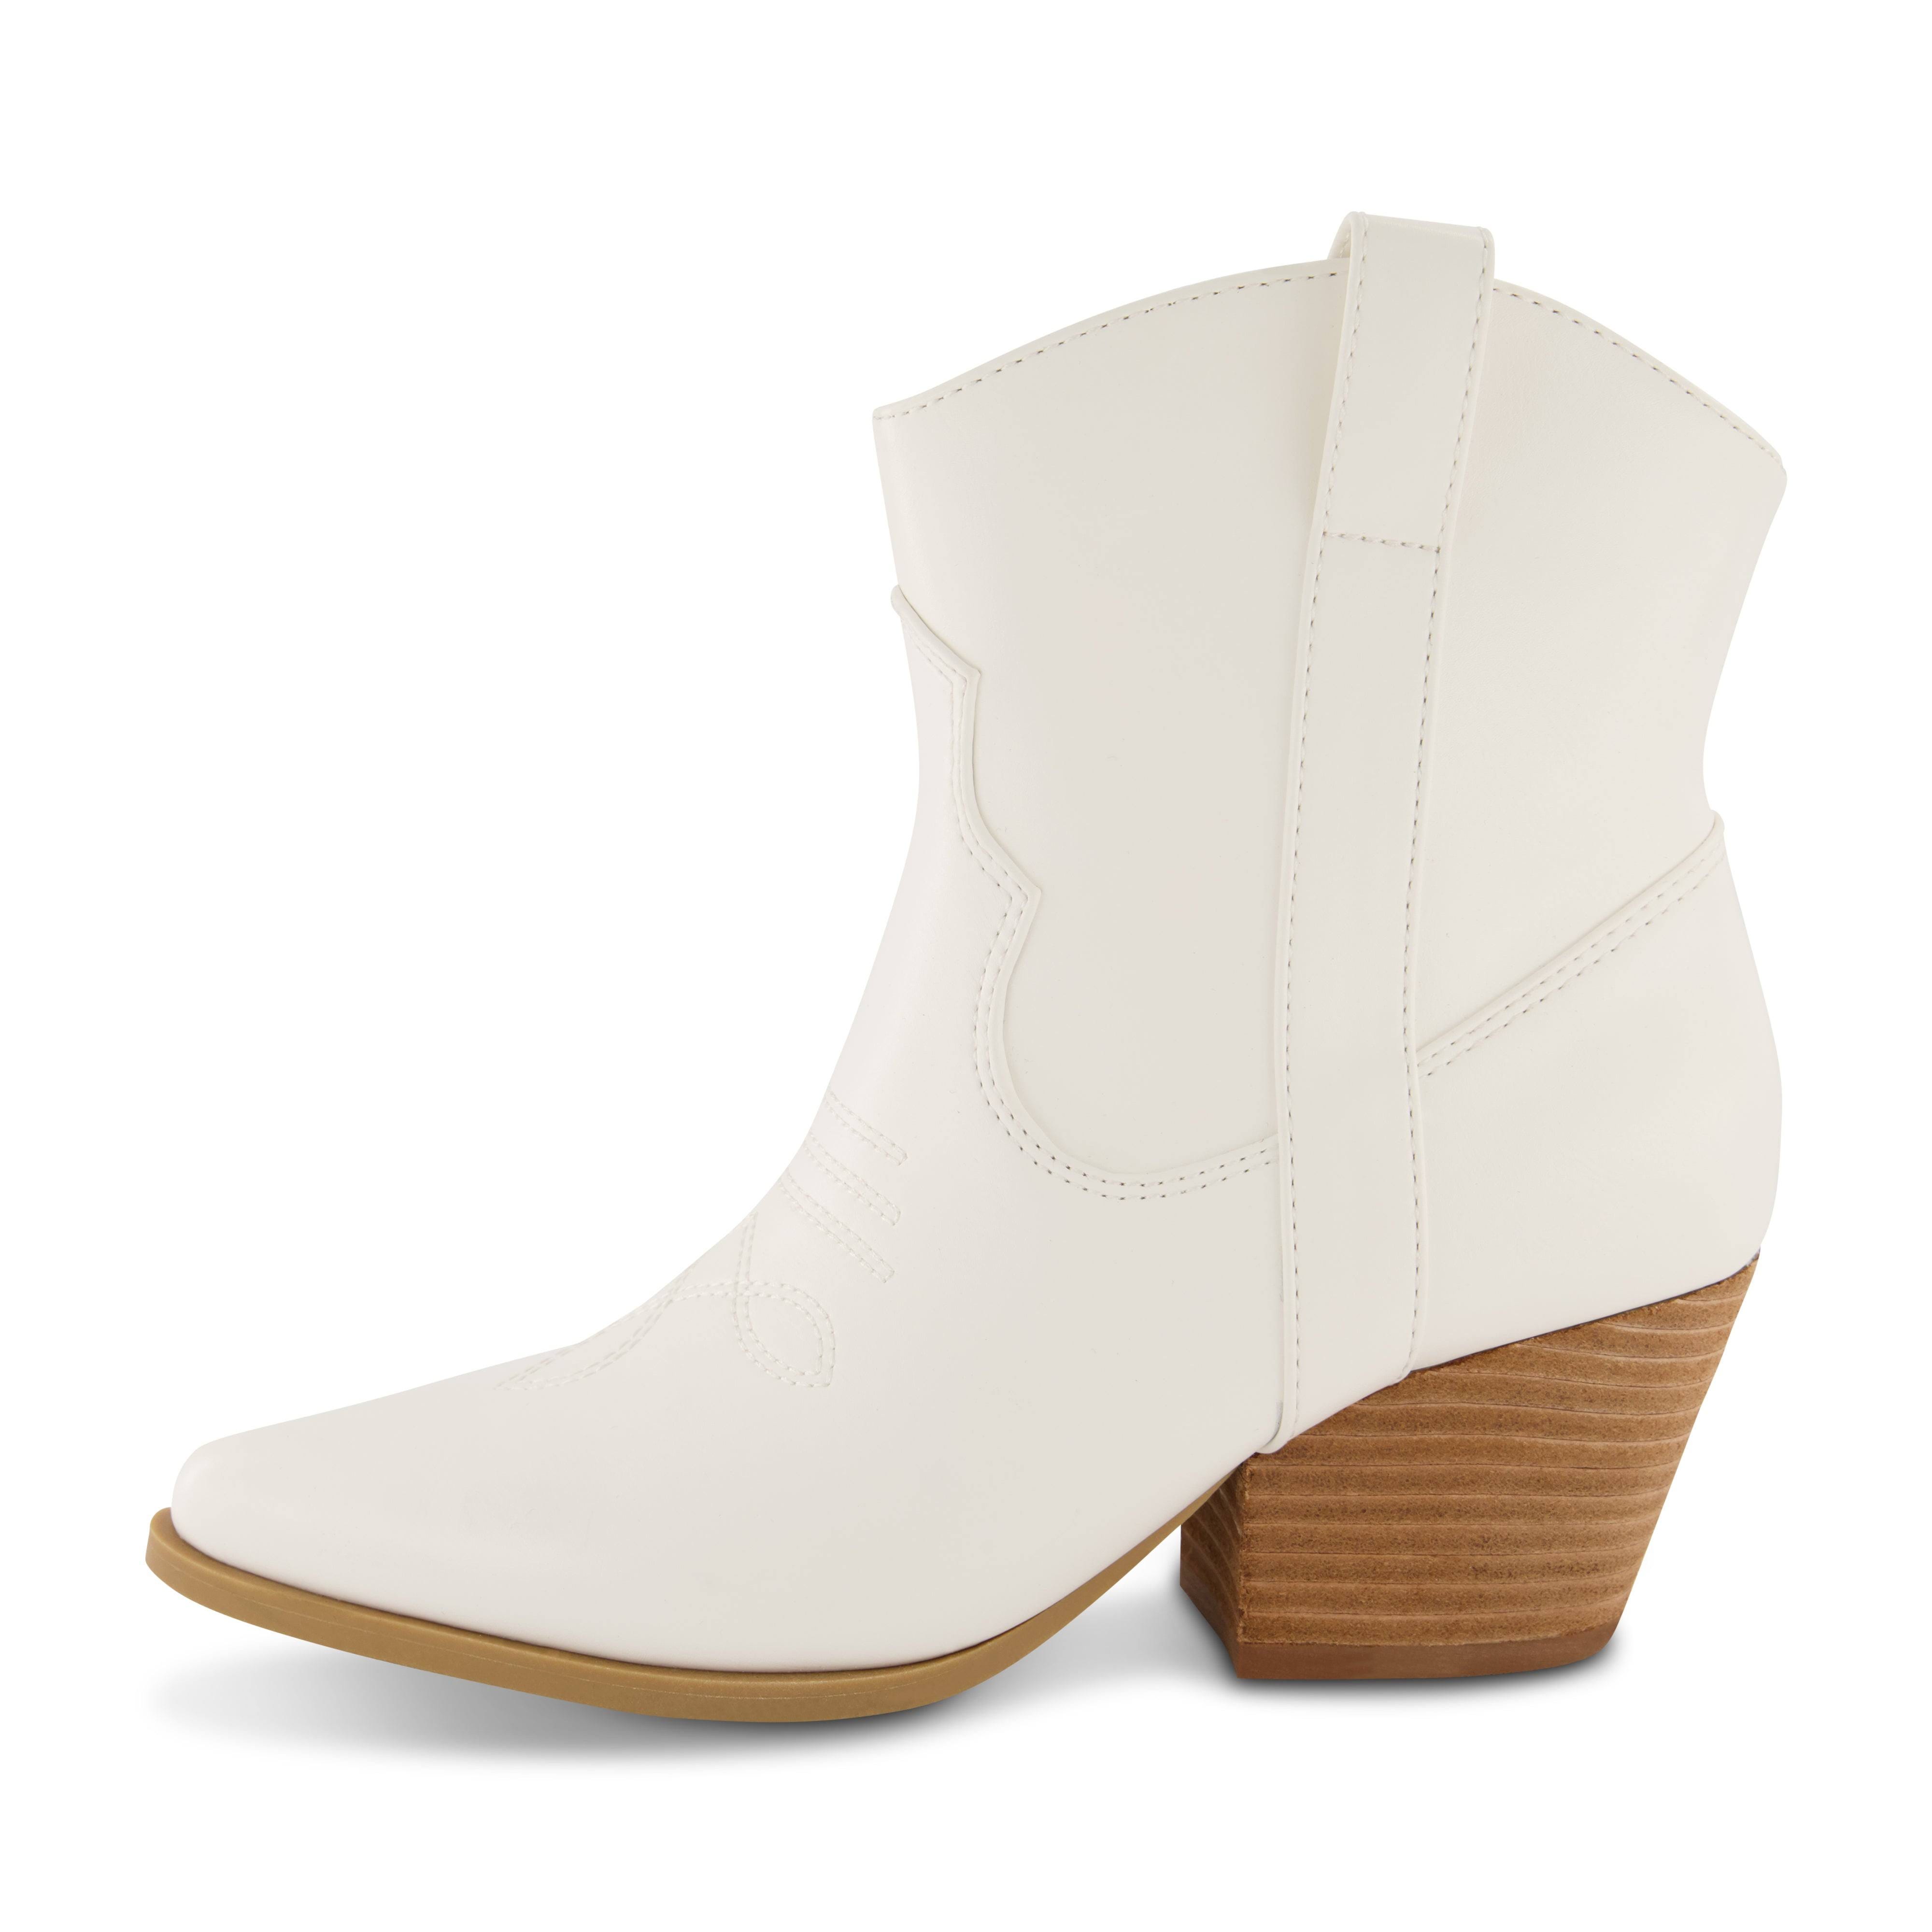 Comfortable Western-Style Stacked Heel Boot with Vegan Leather | Image